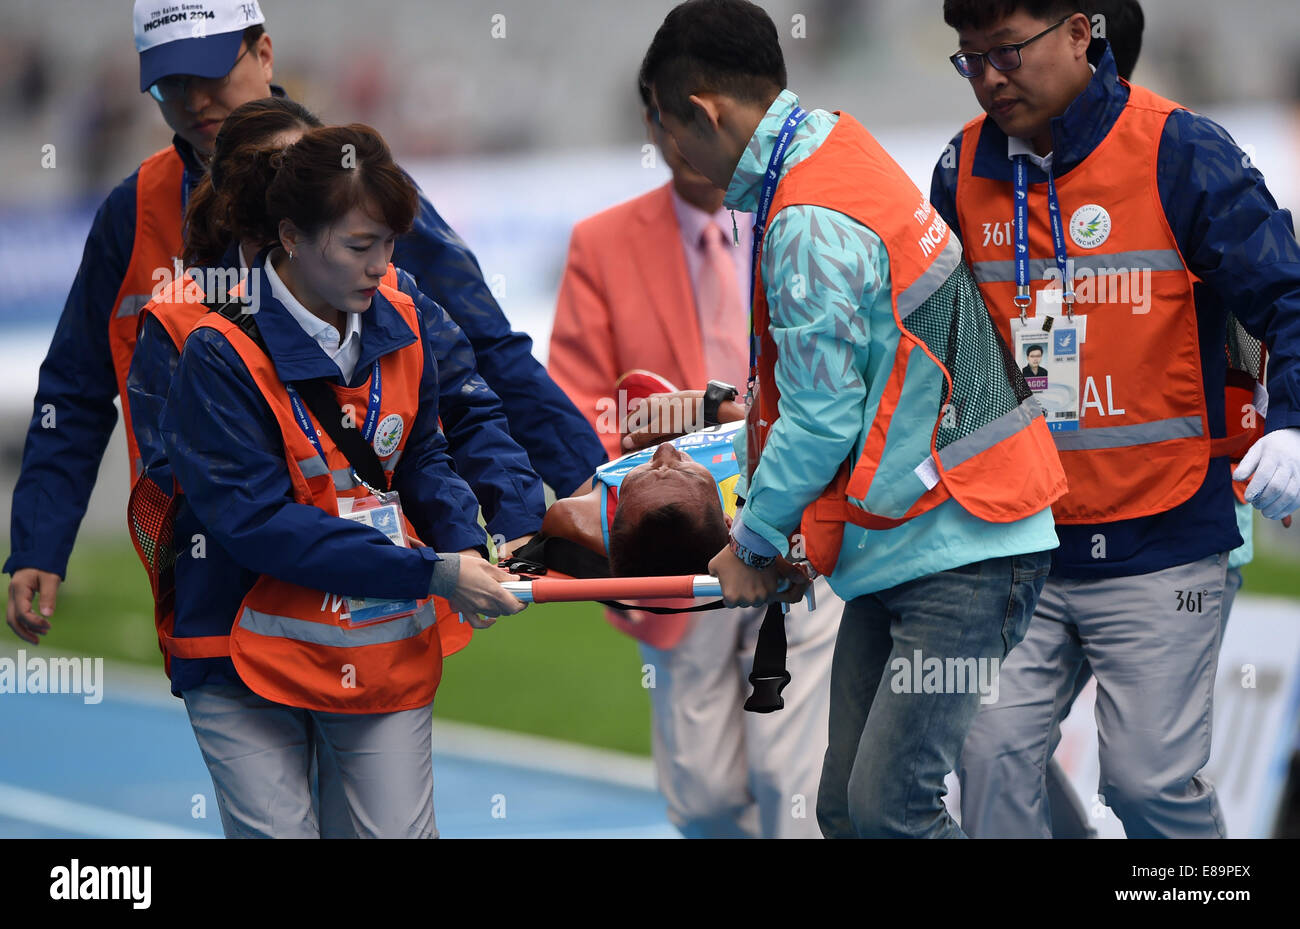 Incheon, South Korea. 3rd Oct, 2014. Bat Ochir Ser Od (C) of Mongolia is carried off the runway after the men's marathon match of athletics at the 17th Asian Games in Incheon, South Korea, Oct. 3, 2014. Bat Ochir Ser Od got the fourth place with 2 hours 13 minutes and 21 seconds. © Ling Yiguang/Xinhua/Alamy Live News Stock Photo